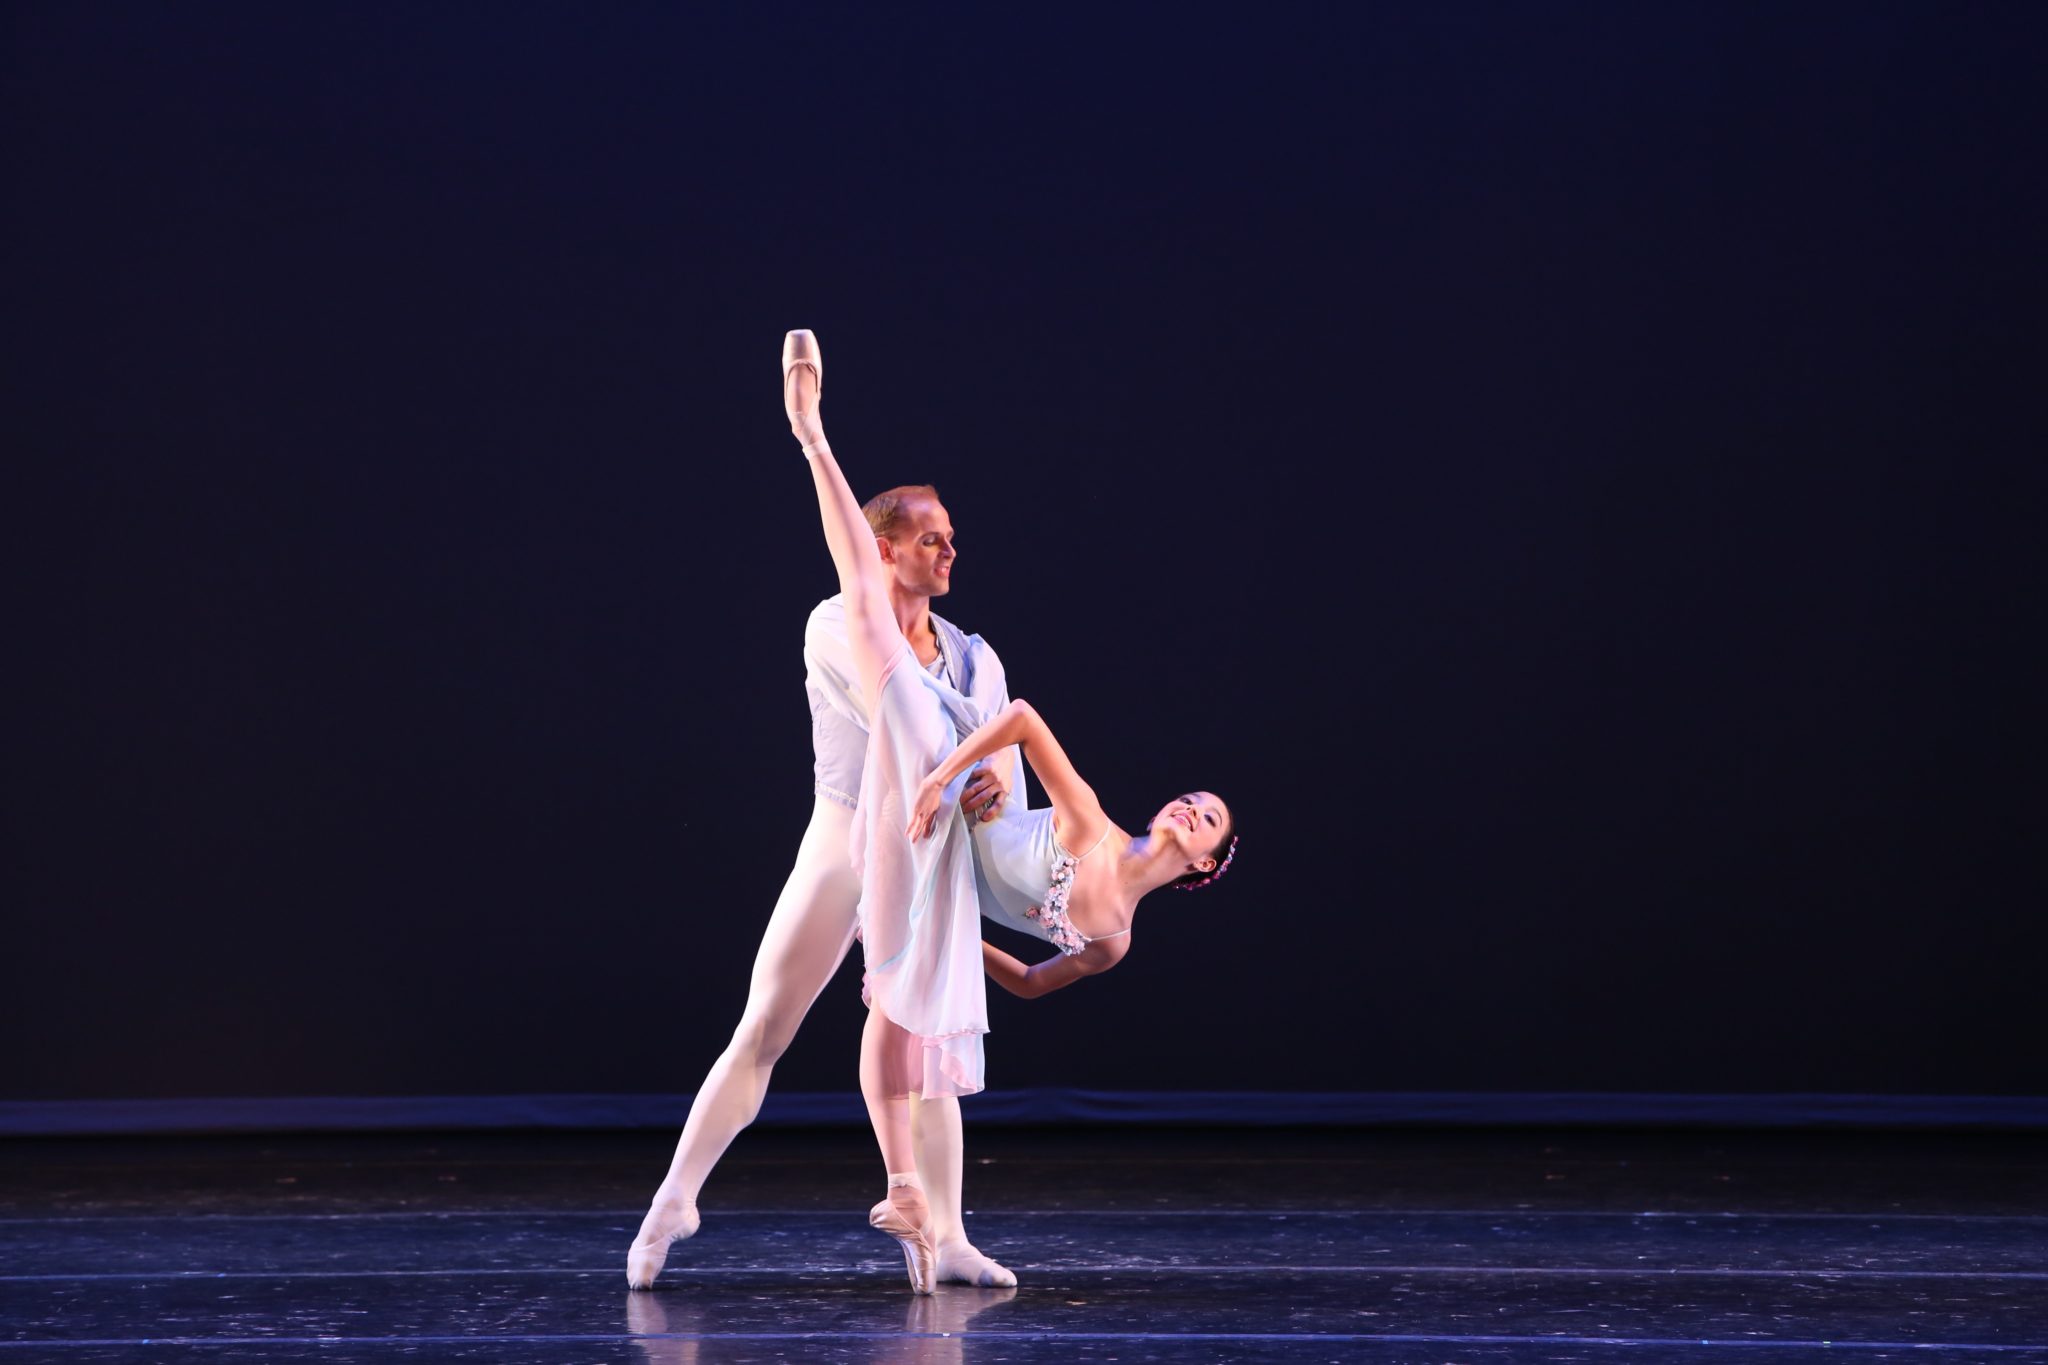 Shelby Tzung in Balanchine's Tchaikovsky Pas de Deux from Showcase 2015, with partner Seth Belliston. Photo by Todd Lechtick.